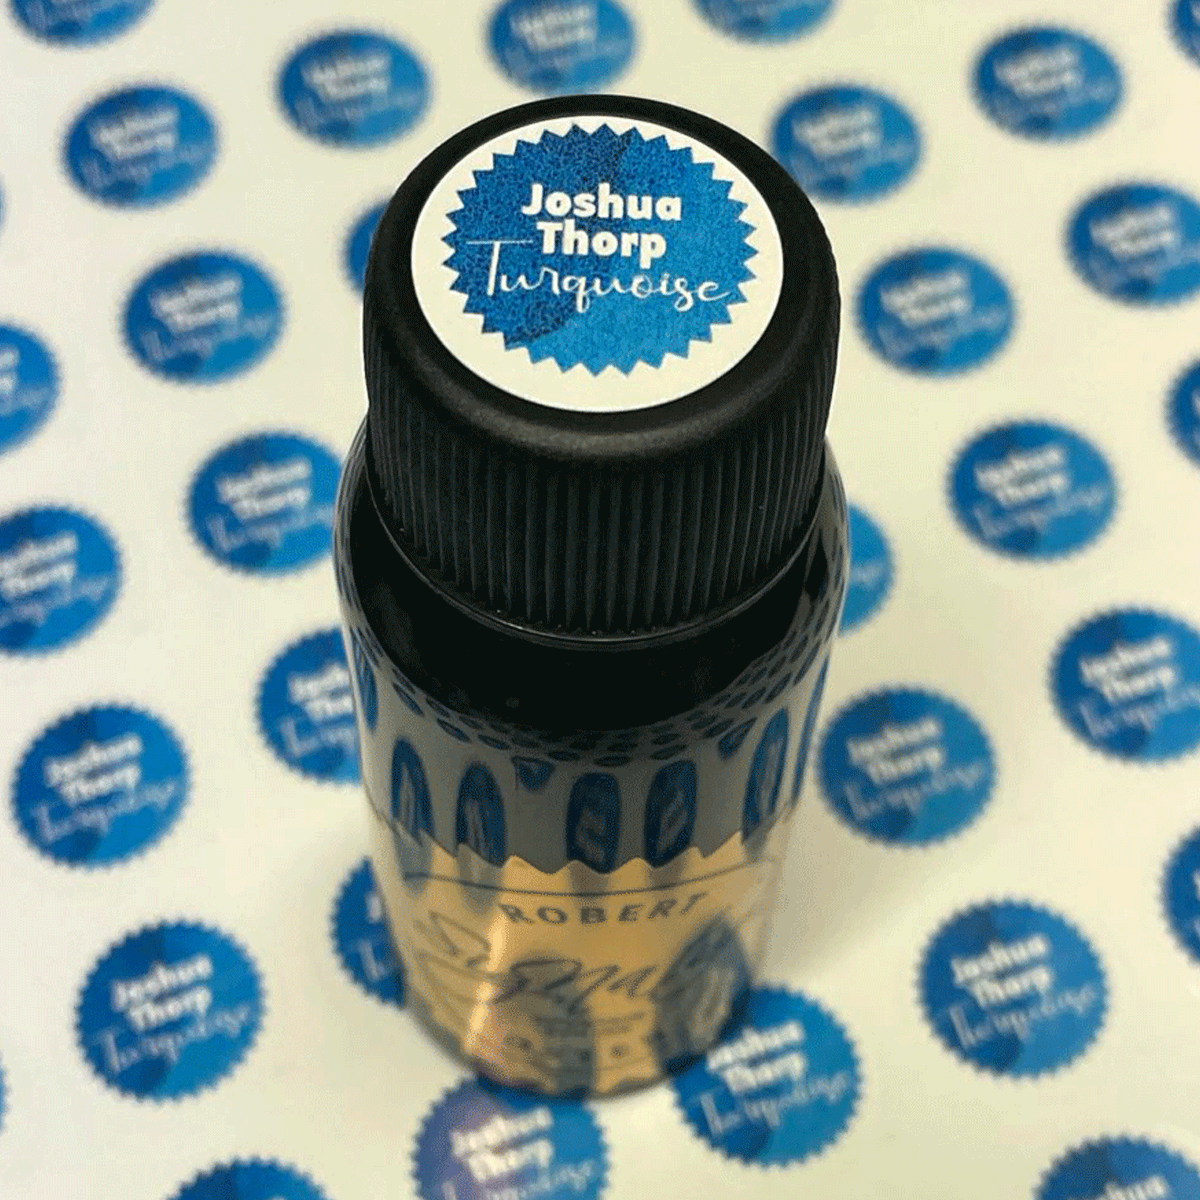 Robert Oster Signature Ink Bottle Joshua Thorp Turquoise - Pencraft the boutique